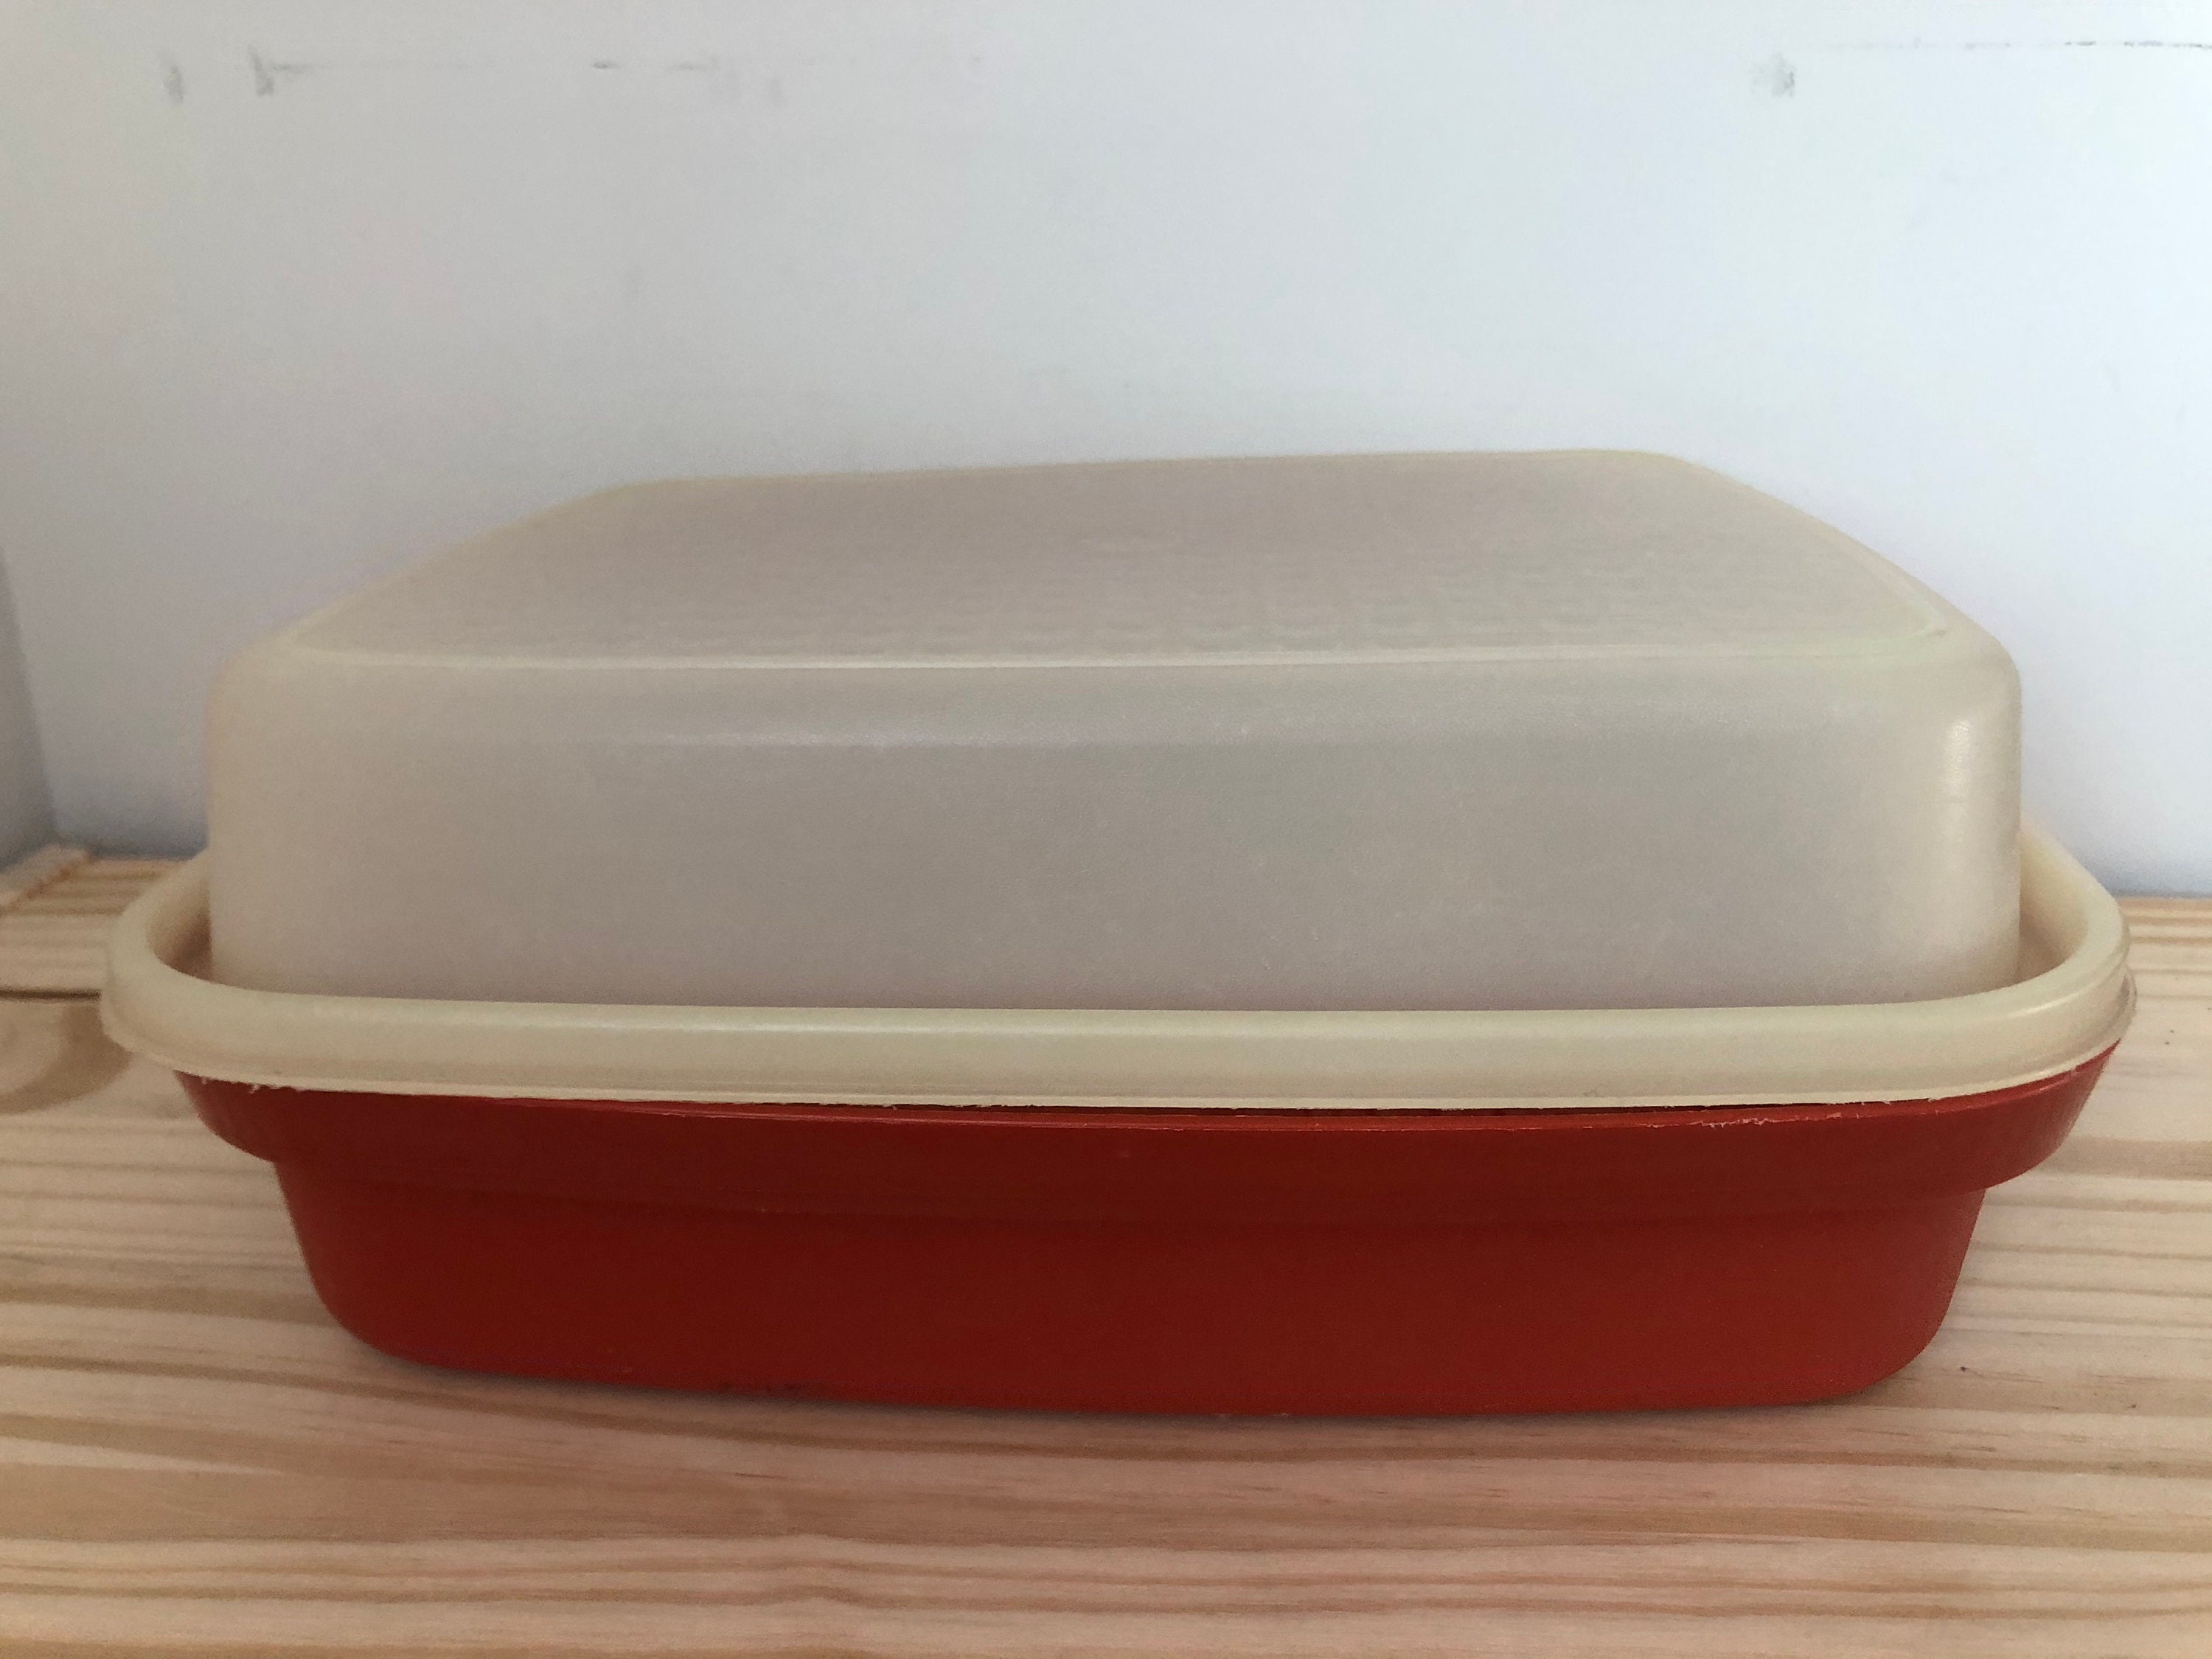 VTG Tupperware Season & Serve Meat Marinade Container Paprika Red